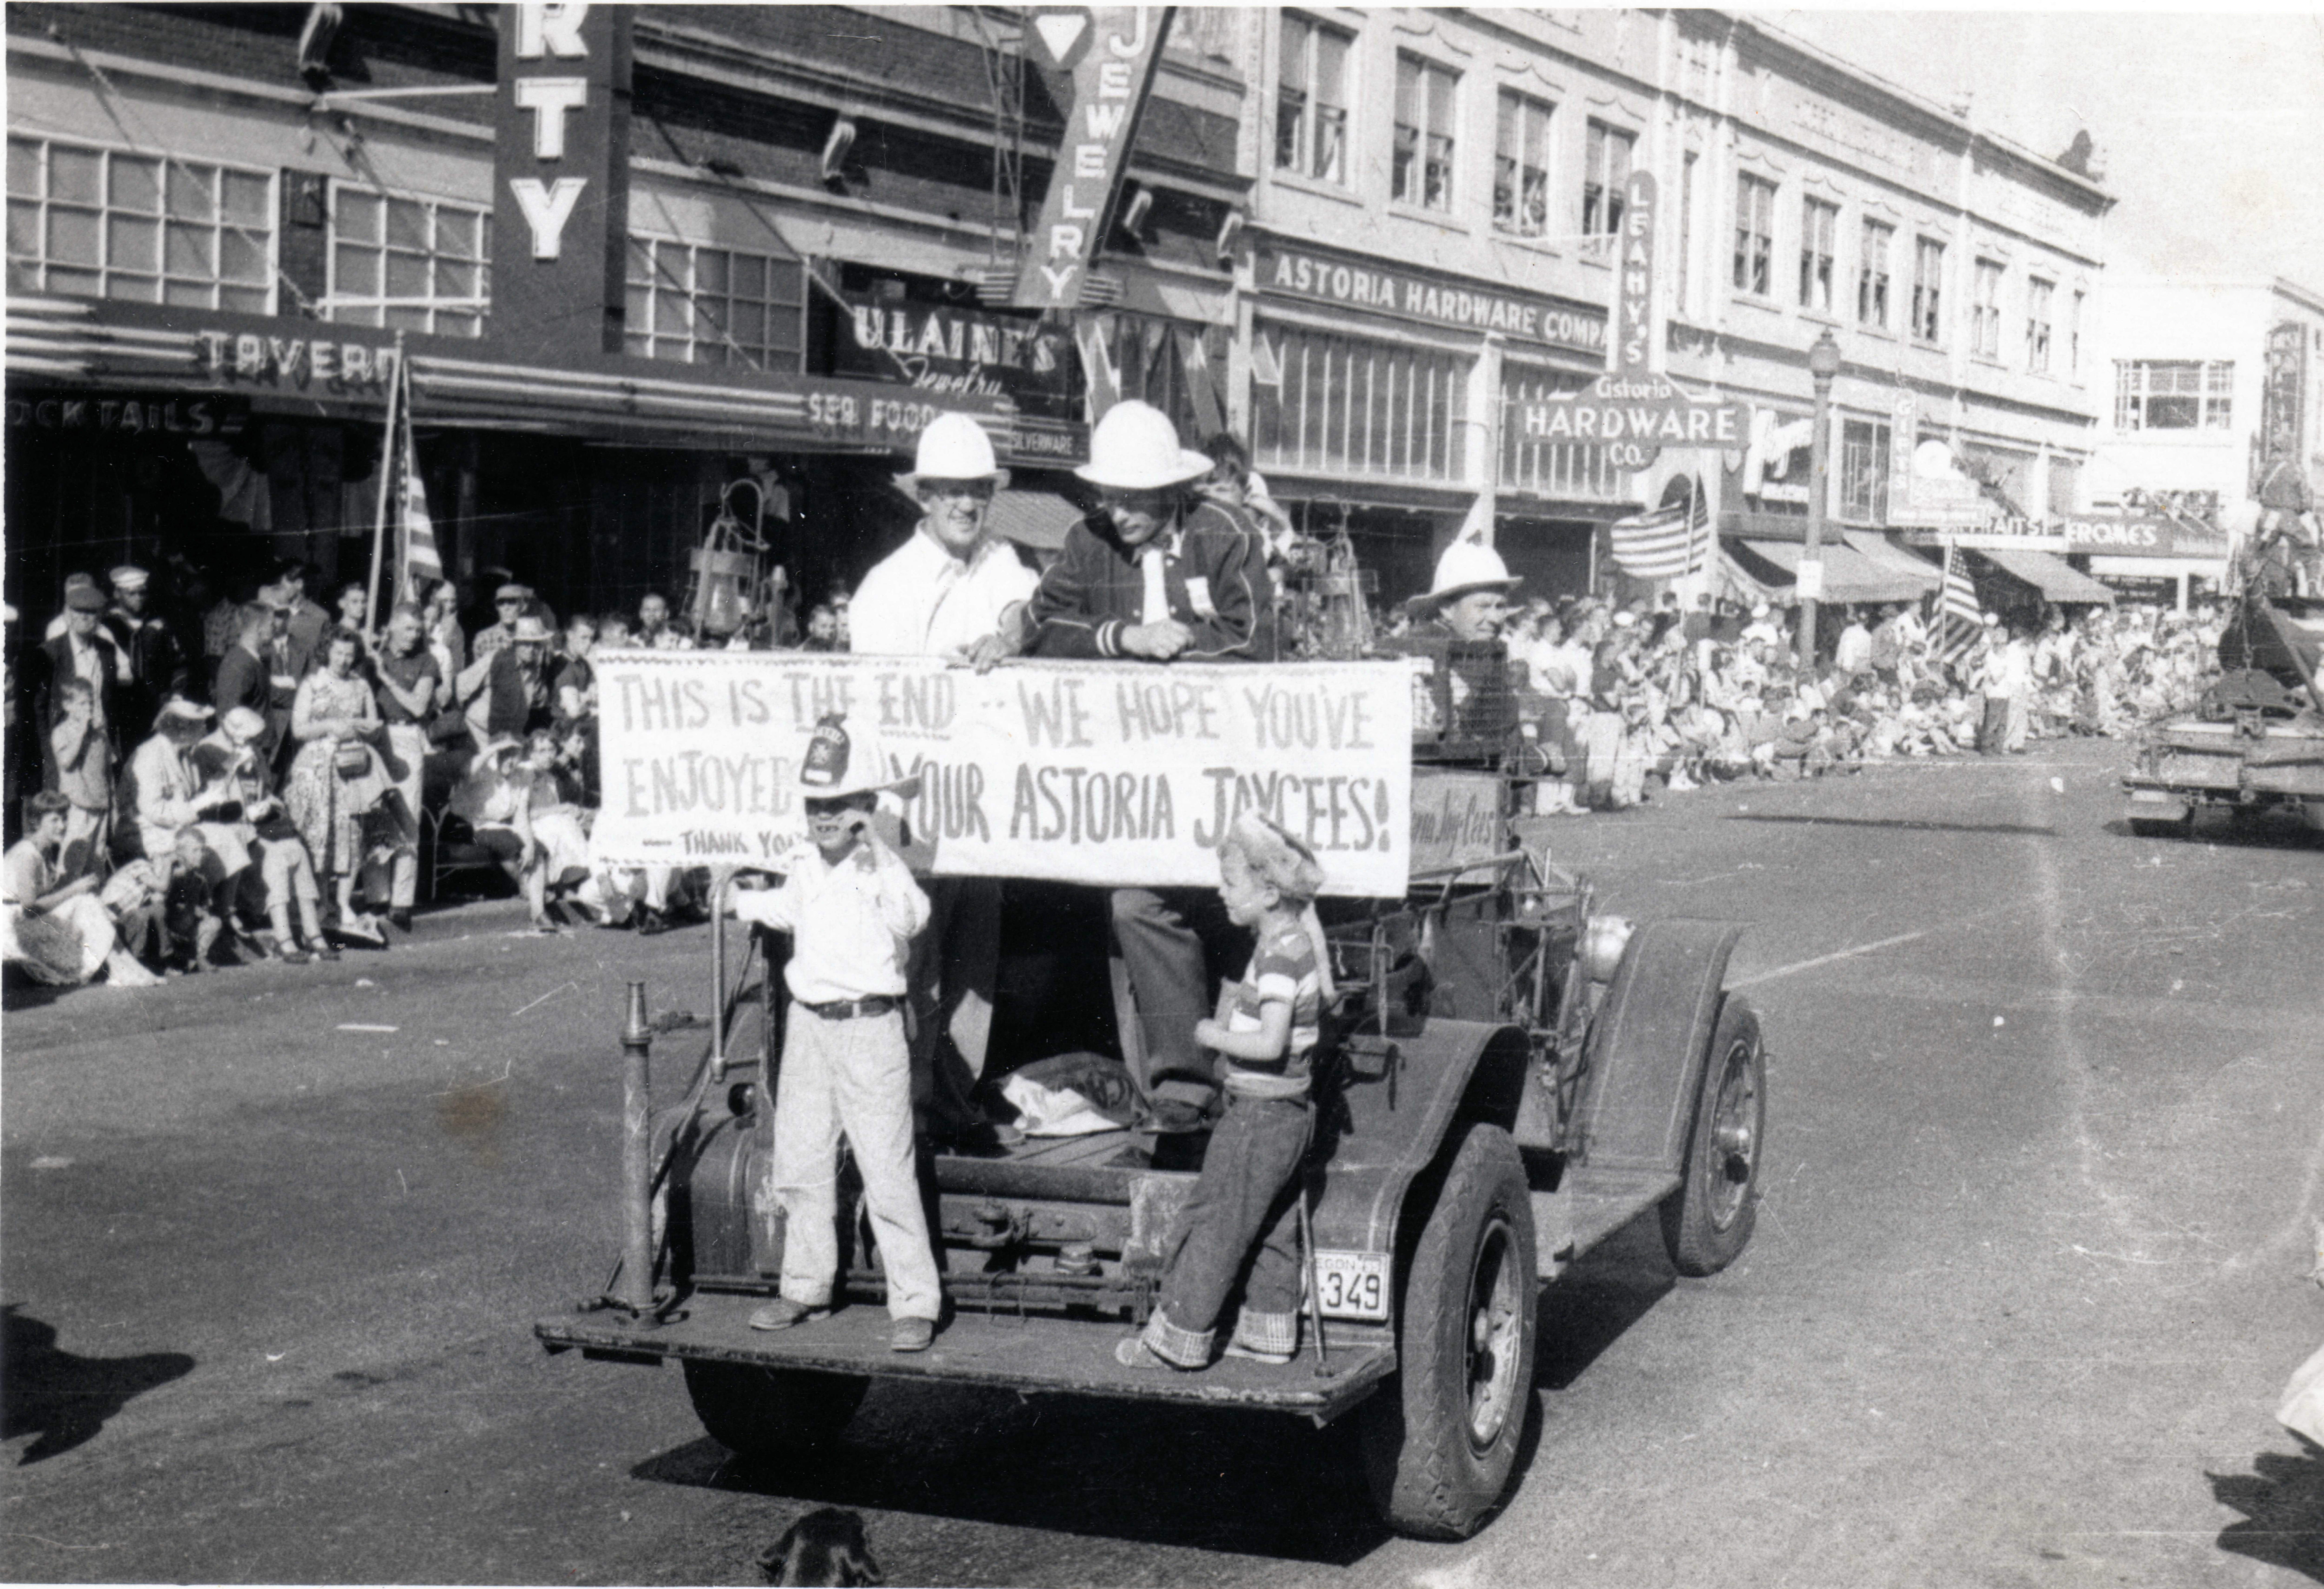 rb eric bruce tommy jaycee parade 1955 001